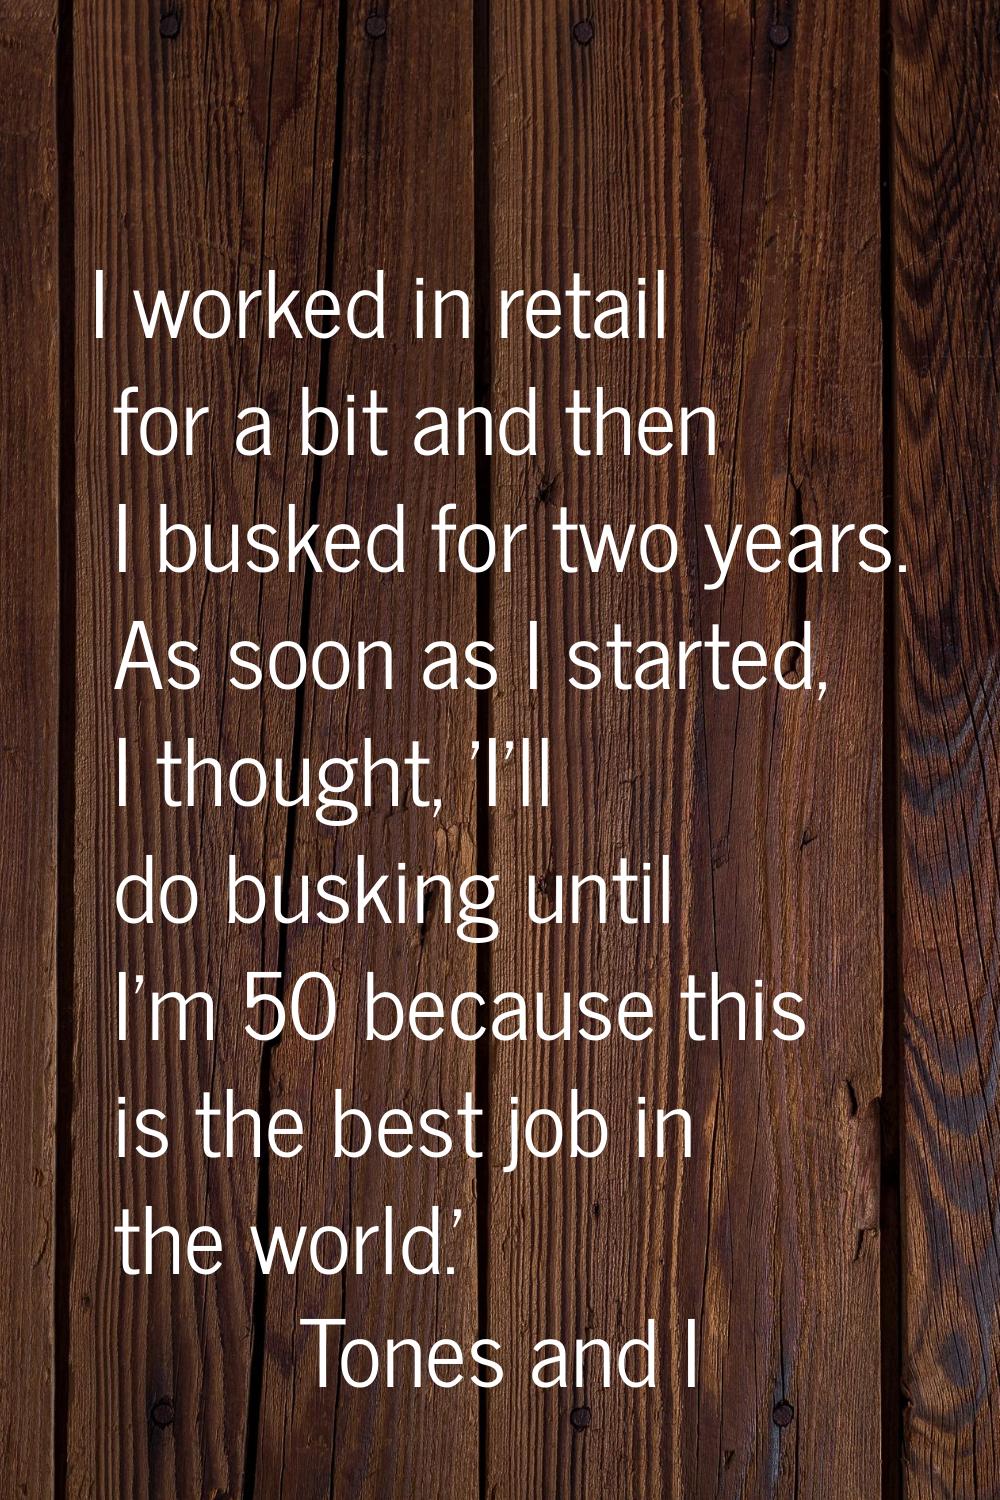 I worked in retail for a bit and then I busked for two years. As soon as I started, I thought, 'I'l